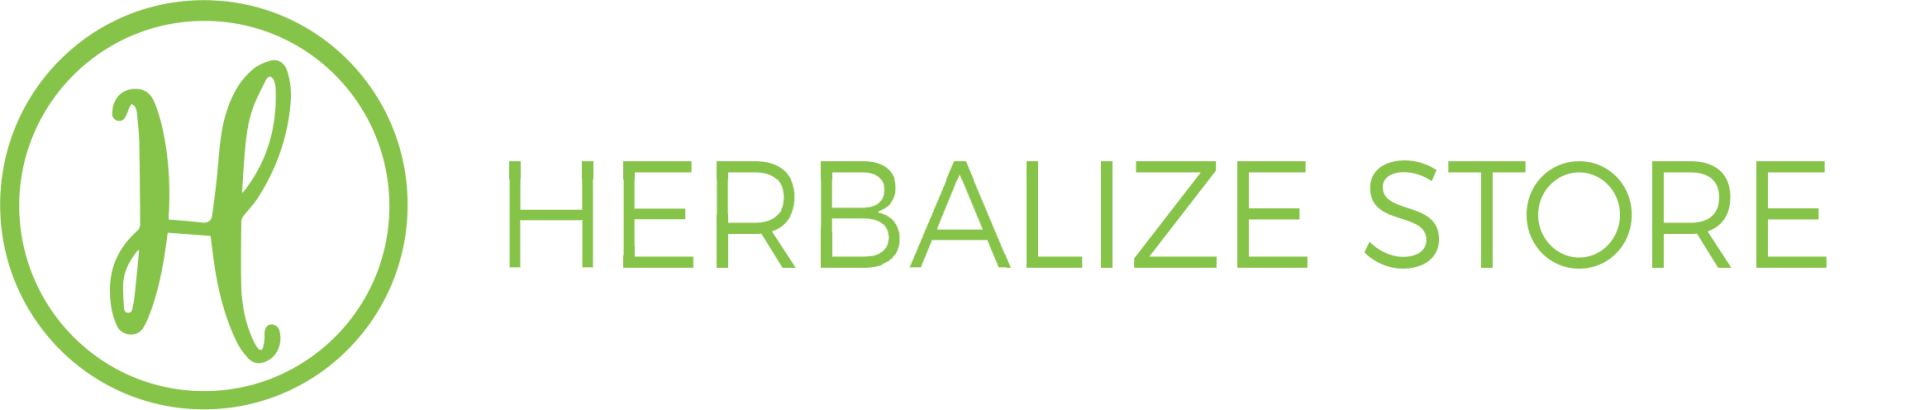 Herbalize Store IE